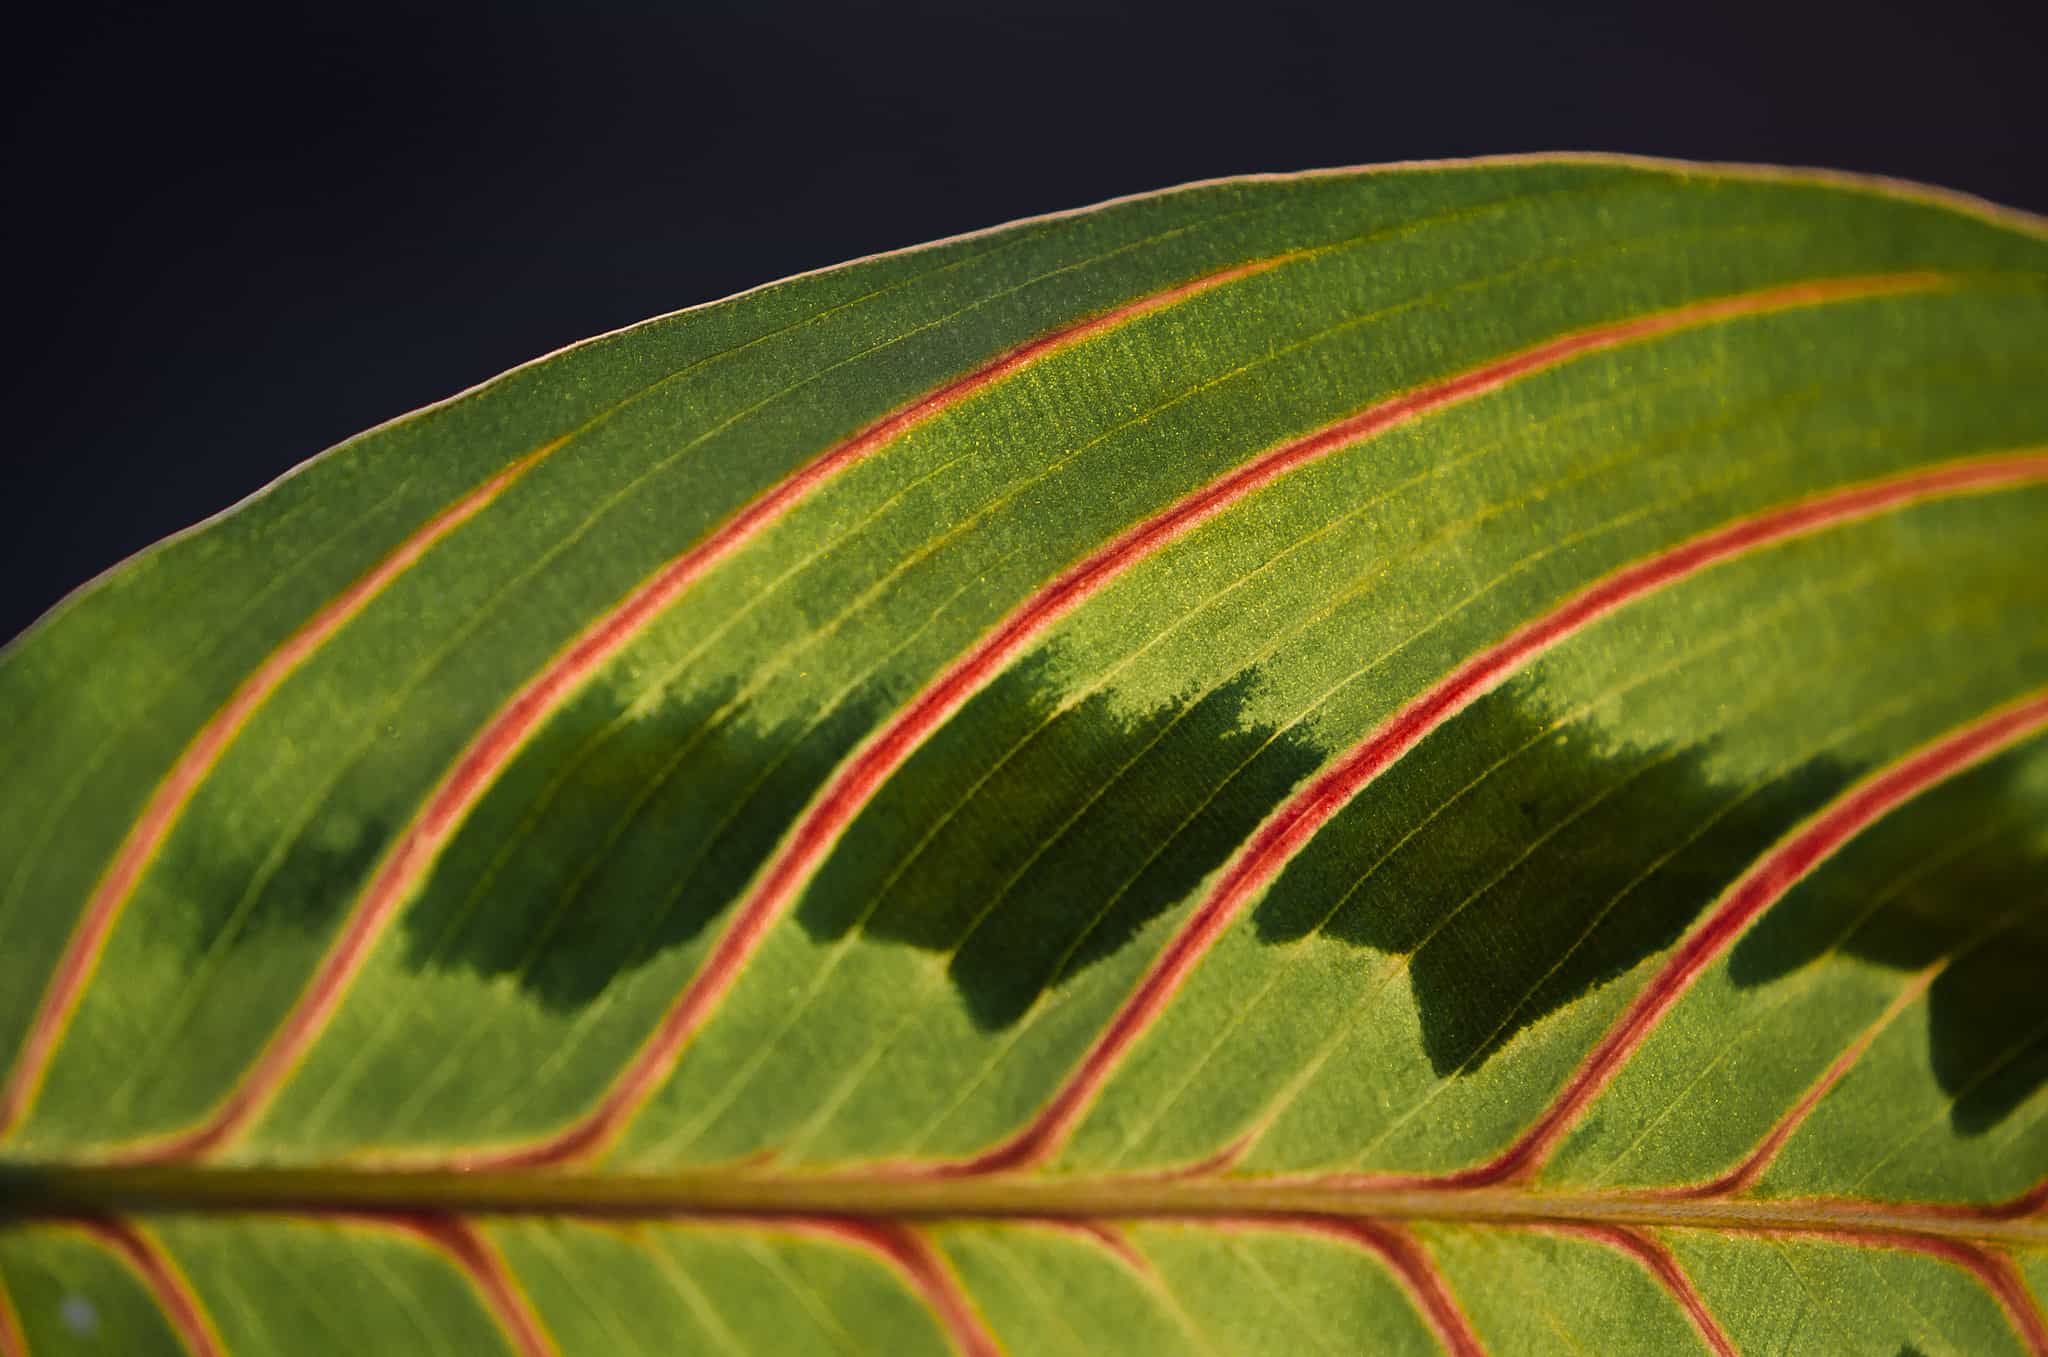 Plant leaves with sensors represent water shortage